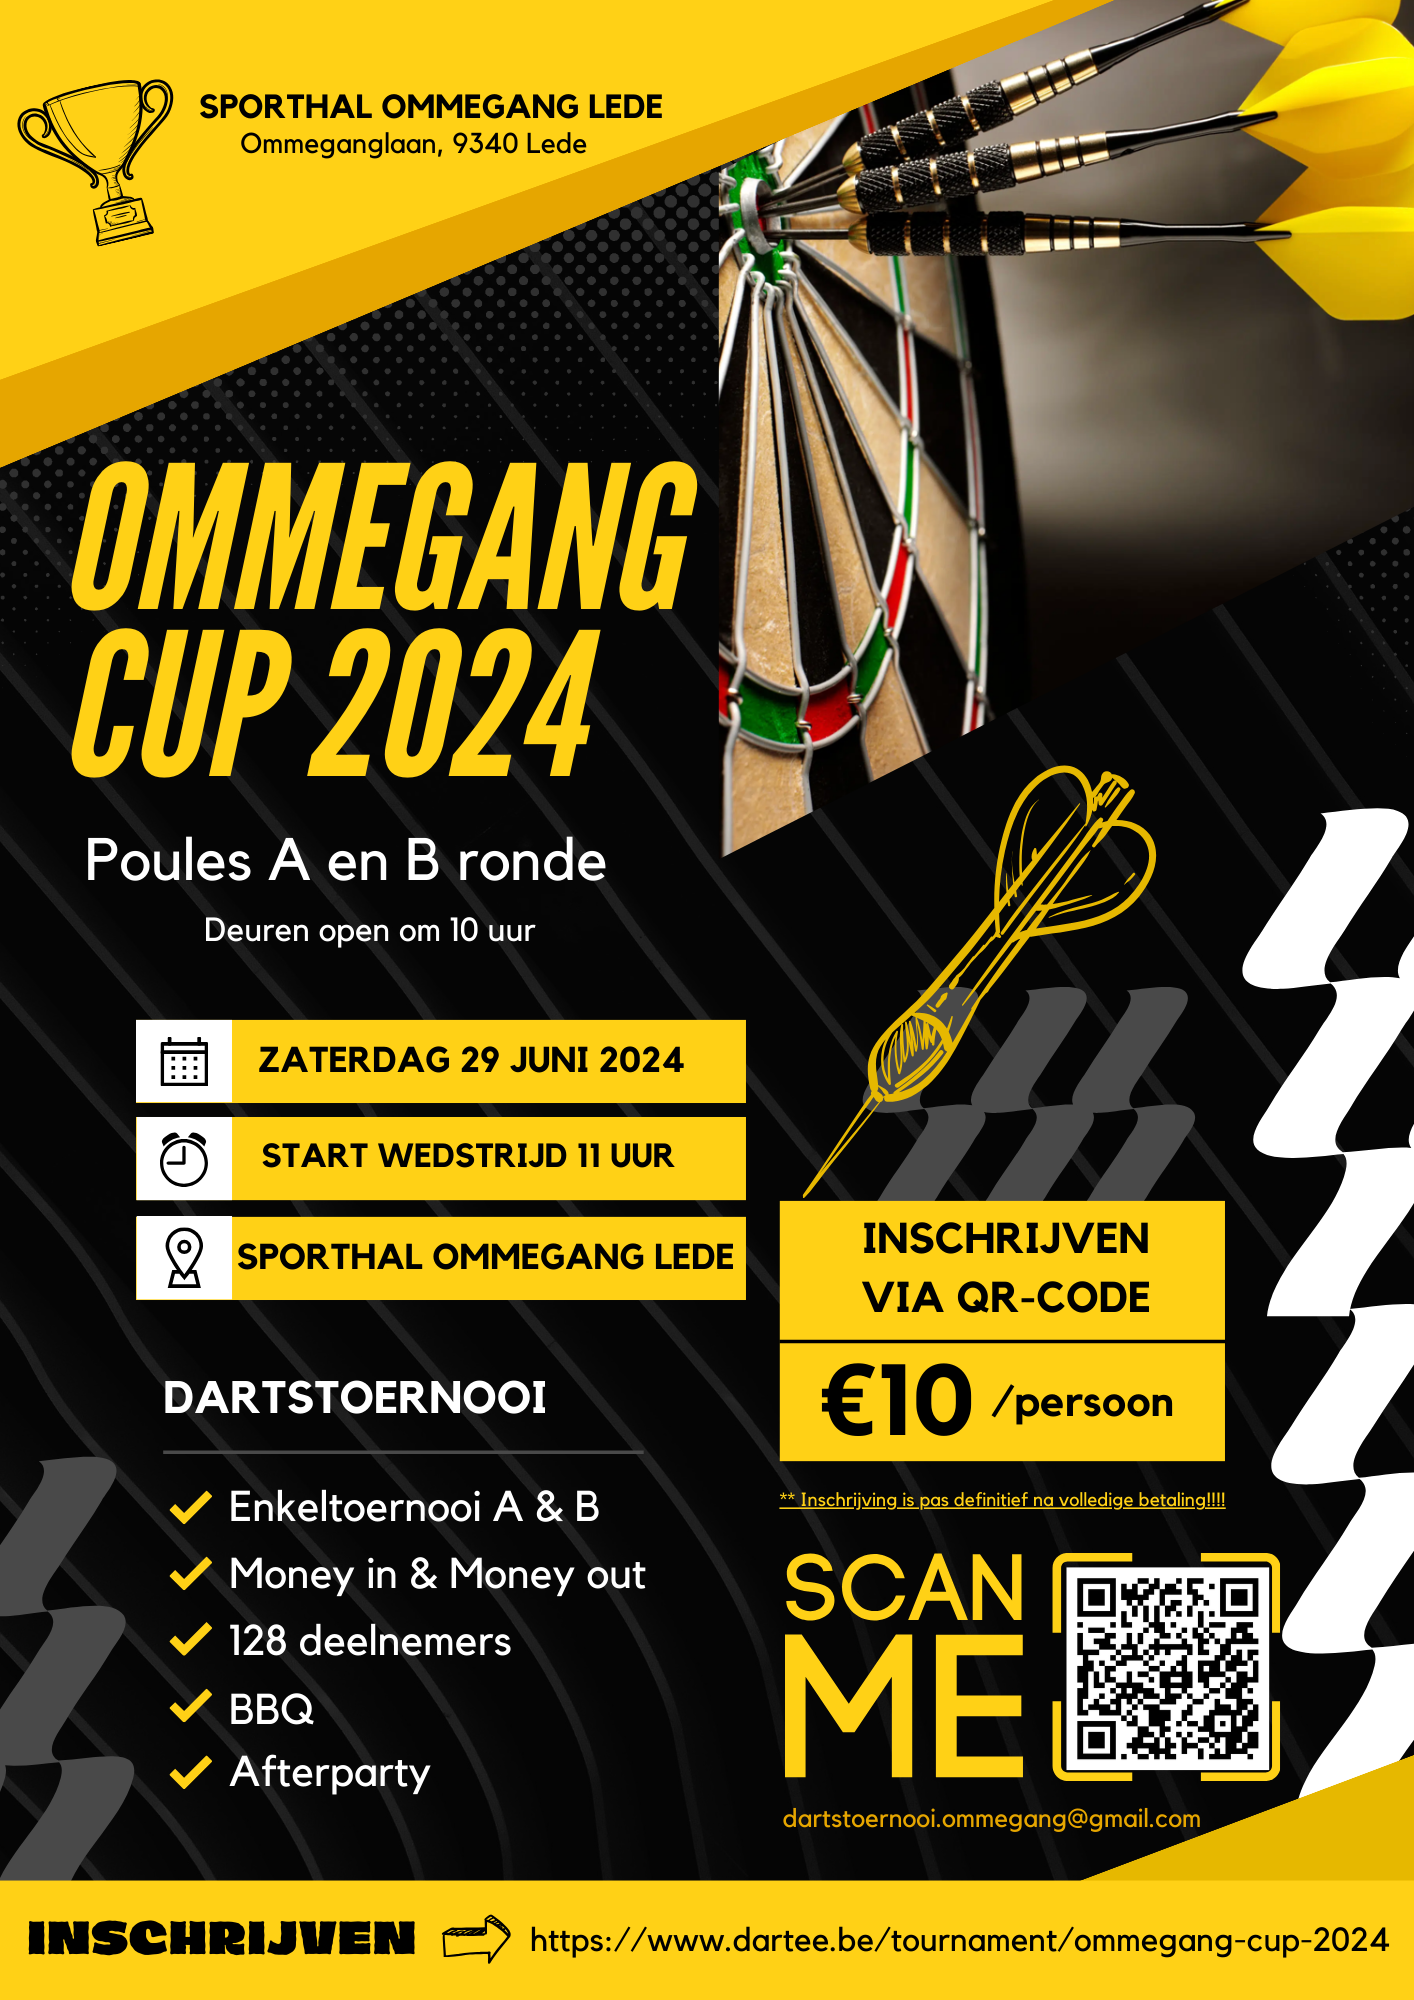 Ommegang cup